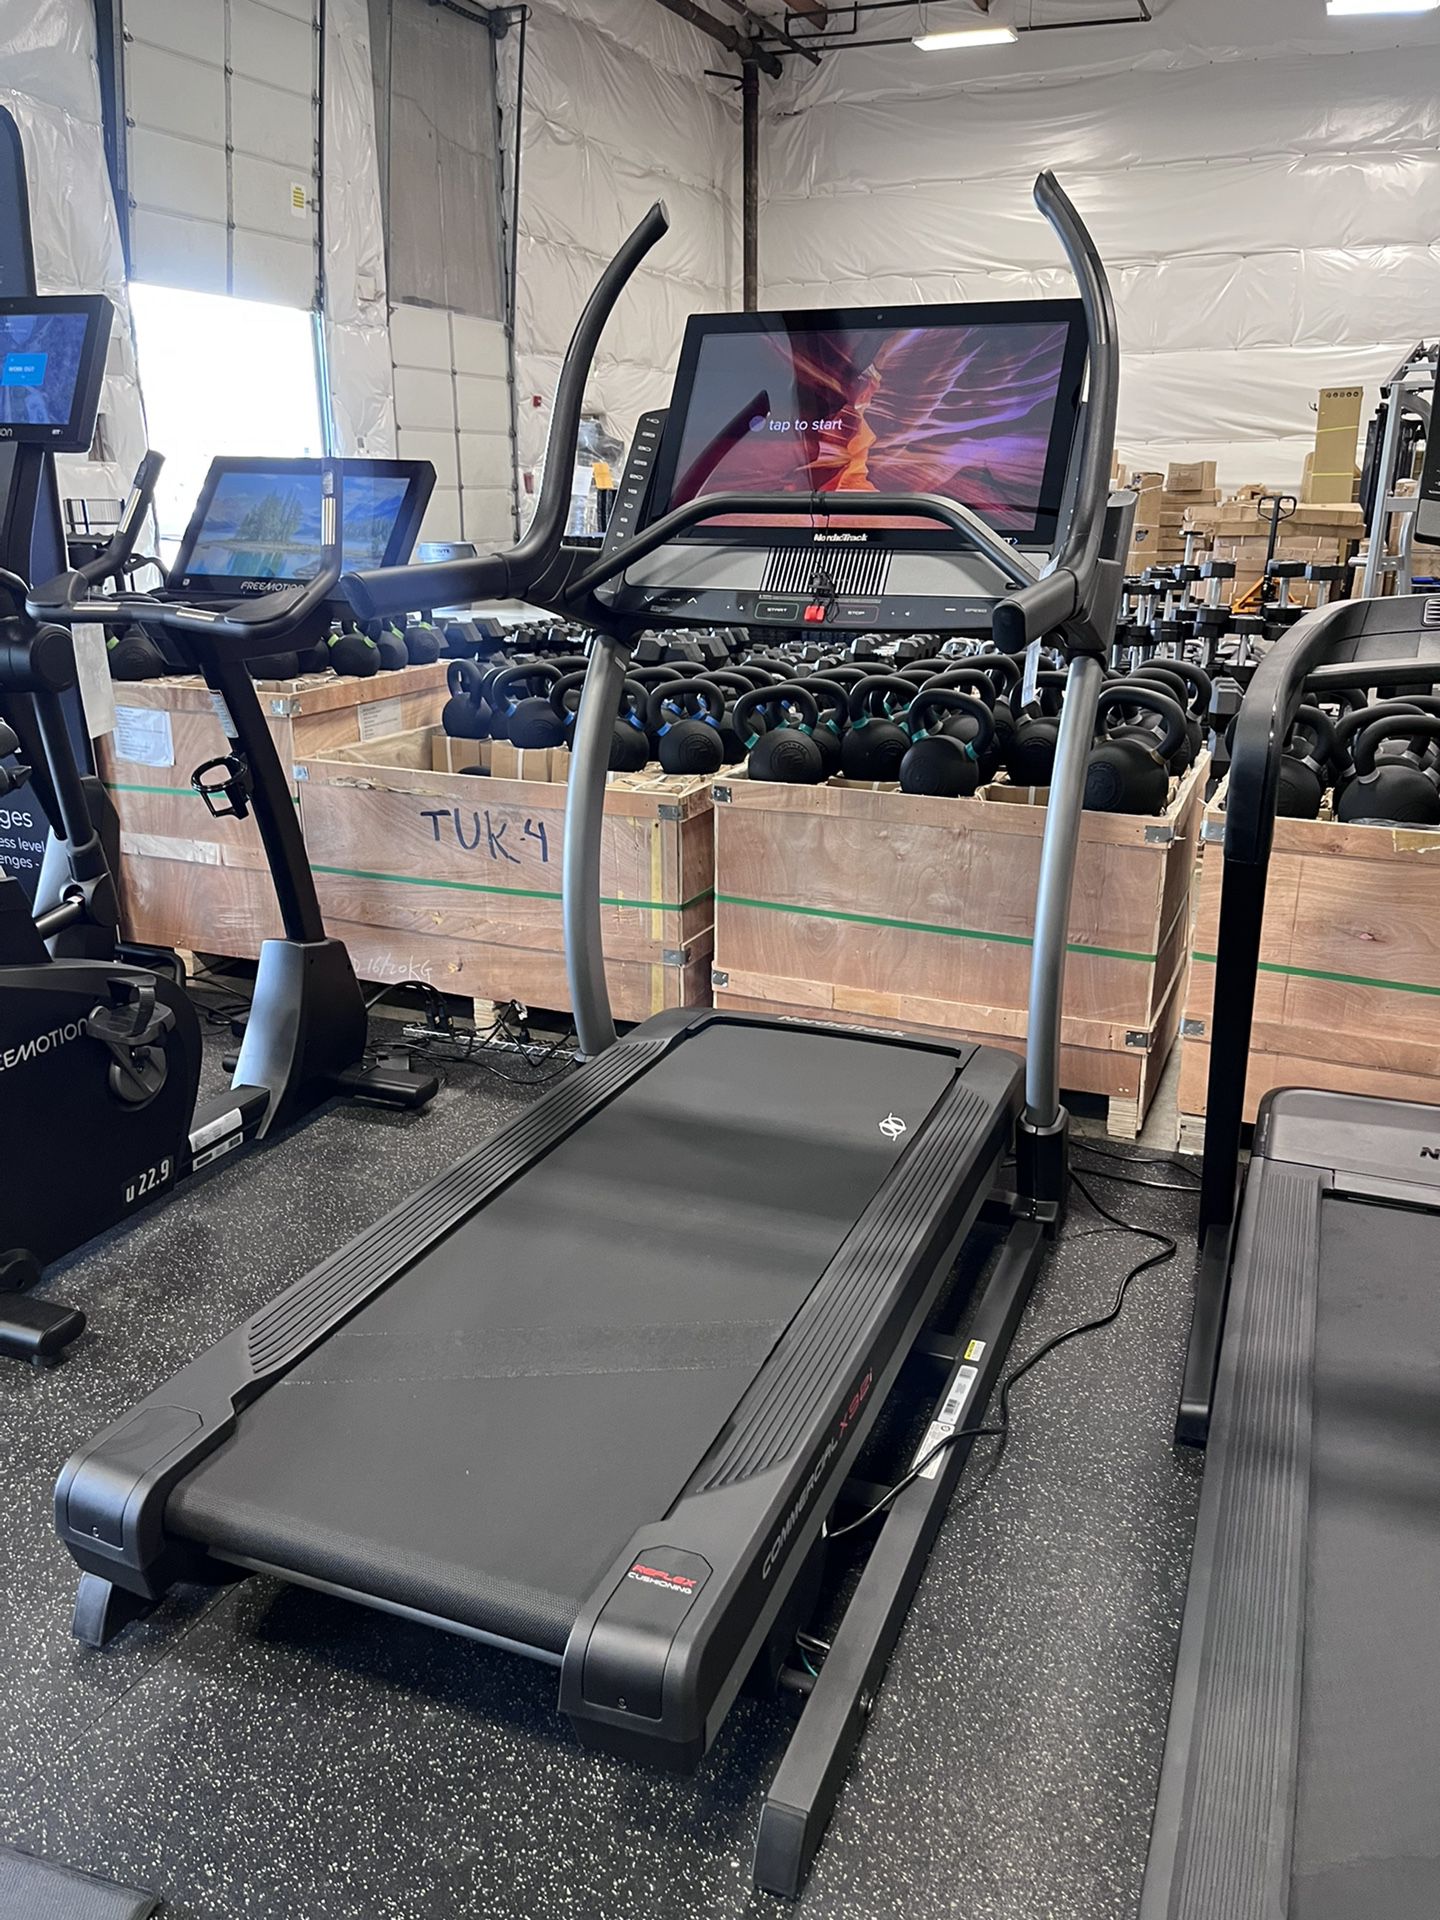 NordicTrack X32i Commercial Treadmill: NEW 0% Financing Available 